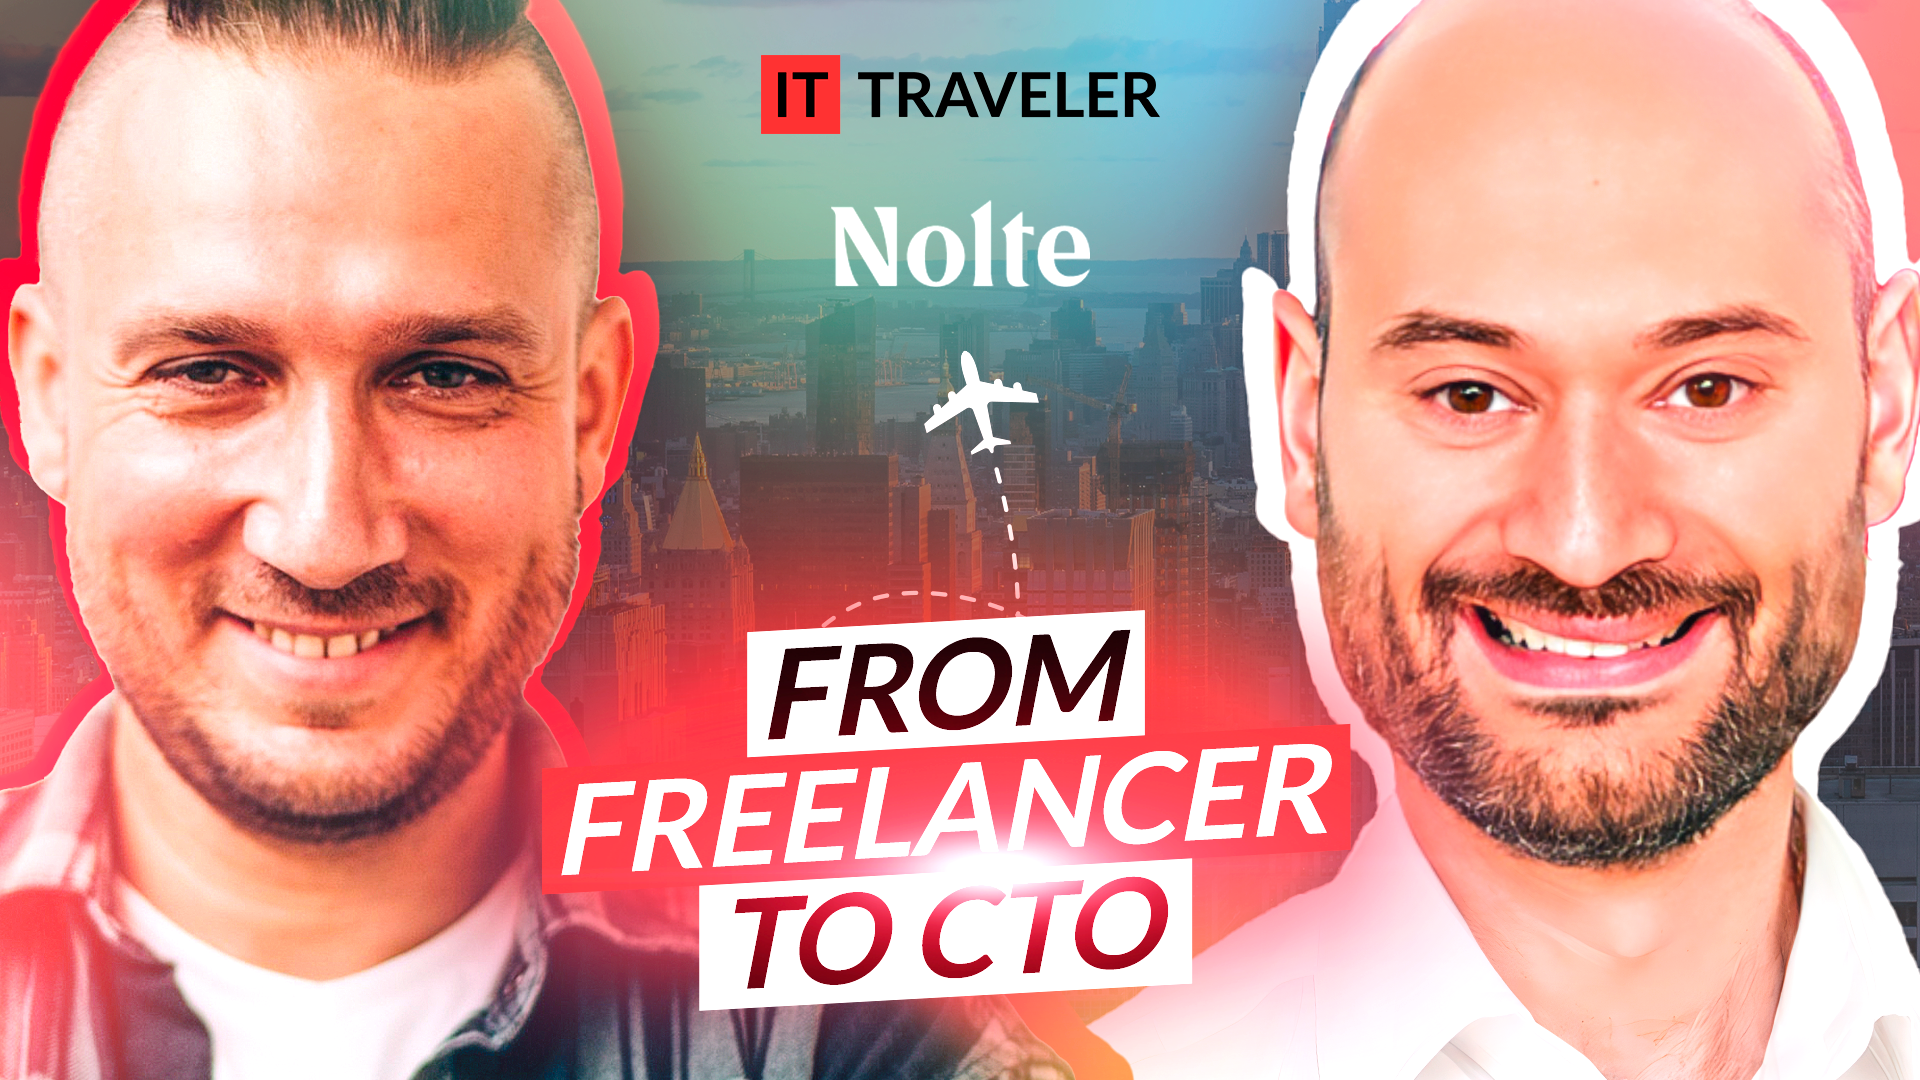 From Freelancer to CTO. Conversation with Adam Fenton, Nolte Co-Founder and CTO